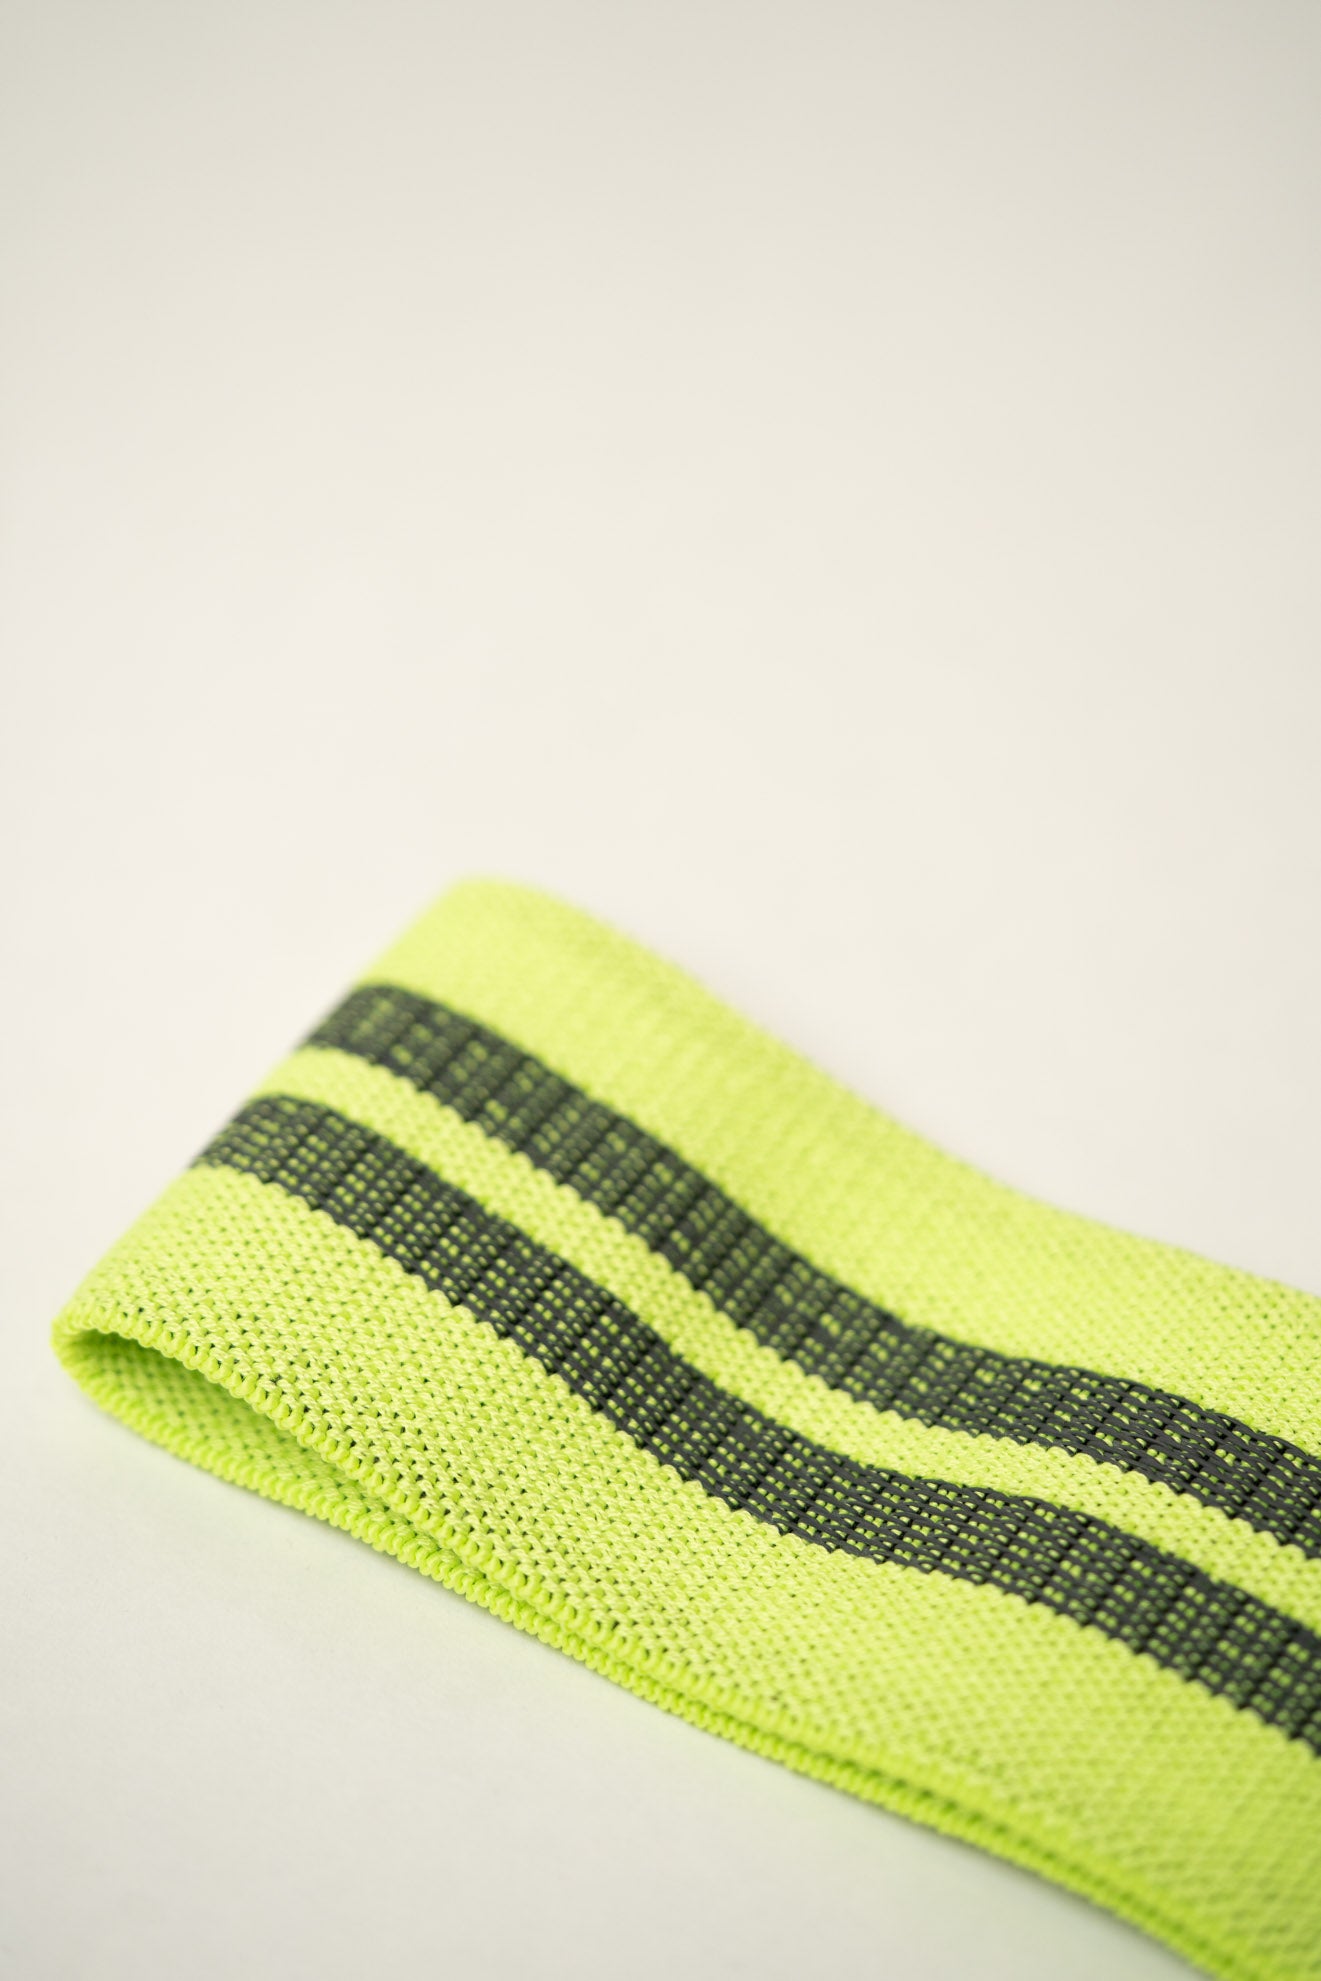 inside of uppper hip resistance band neon green